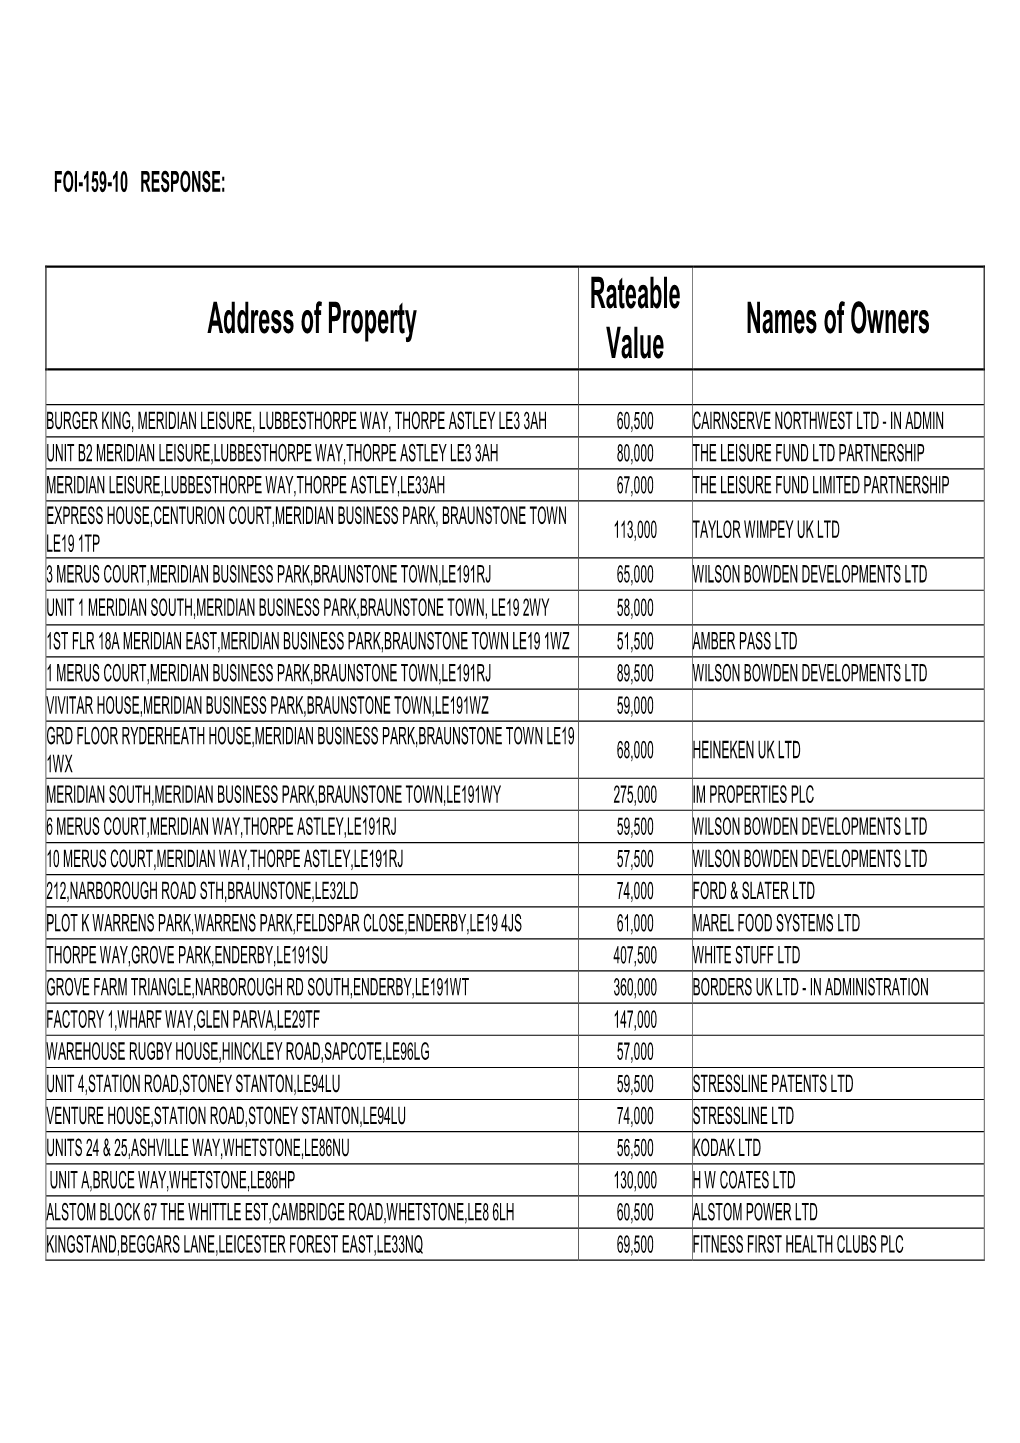 Address of Property Rateable Value Names of Owners